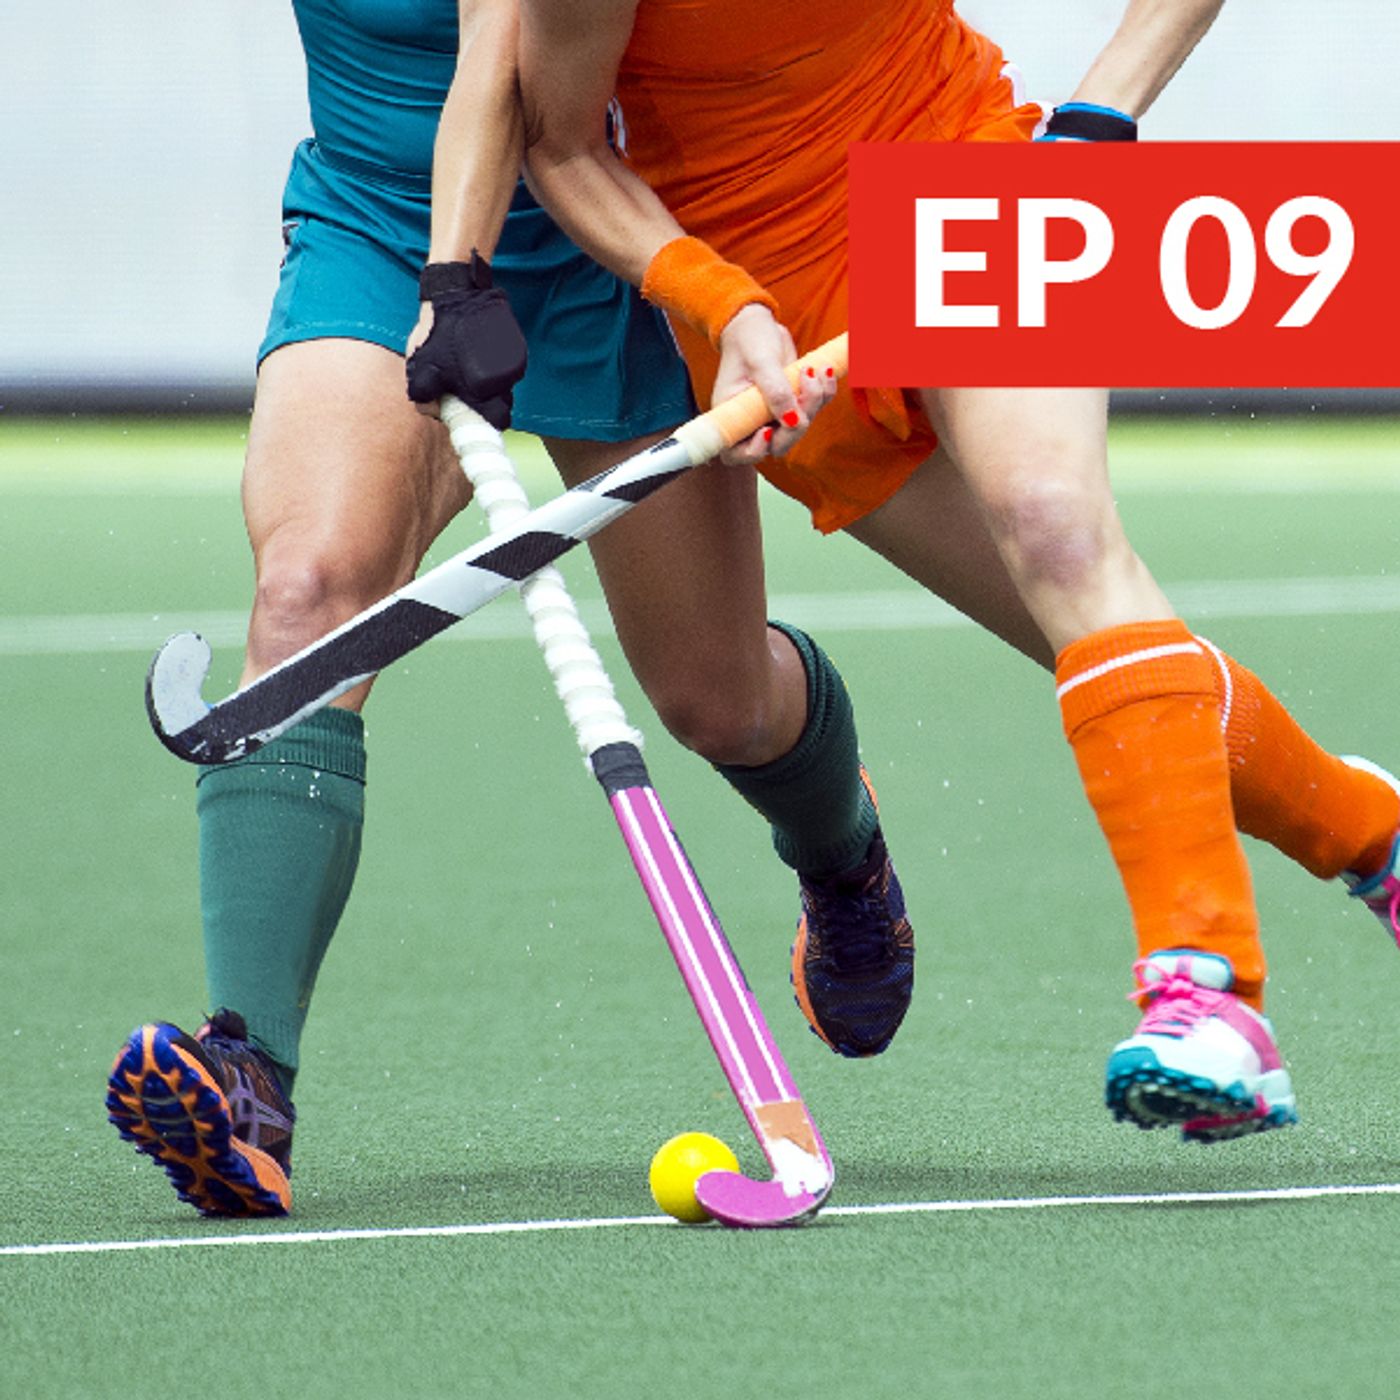 9: A Holistic Approach to Athlete Development – with Mark Egner, William & Mary Field Hockey